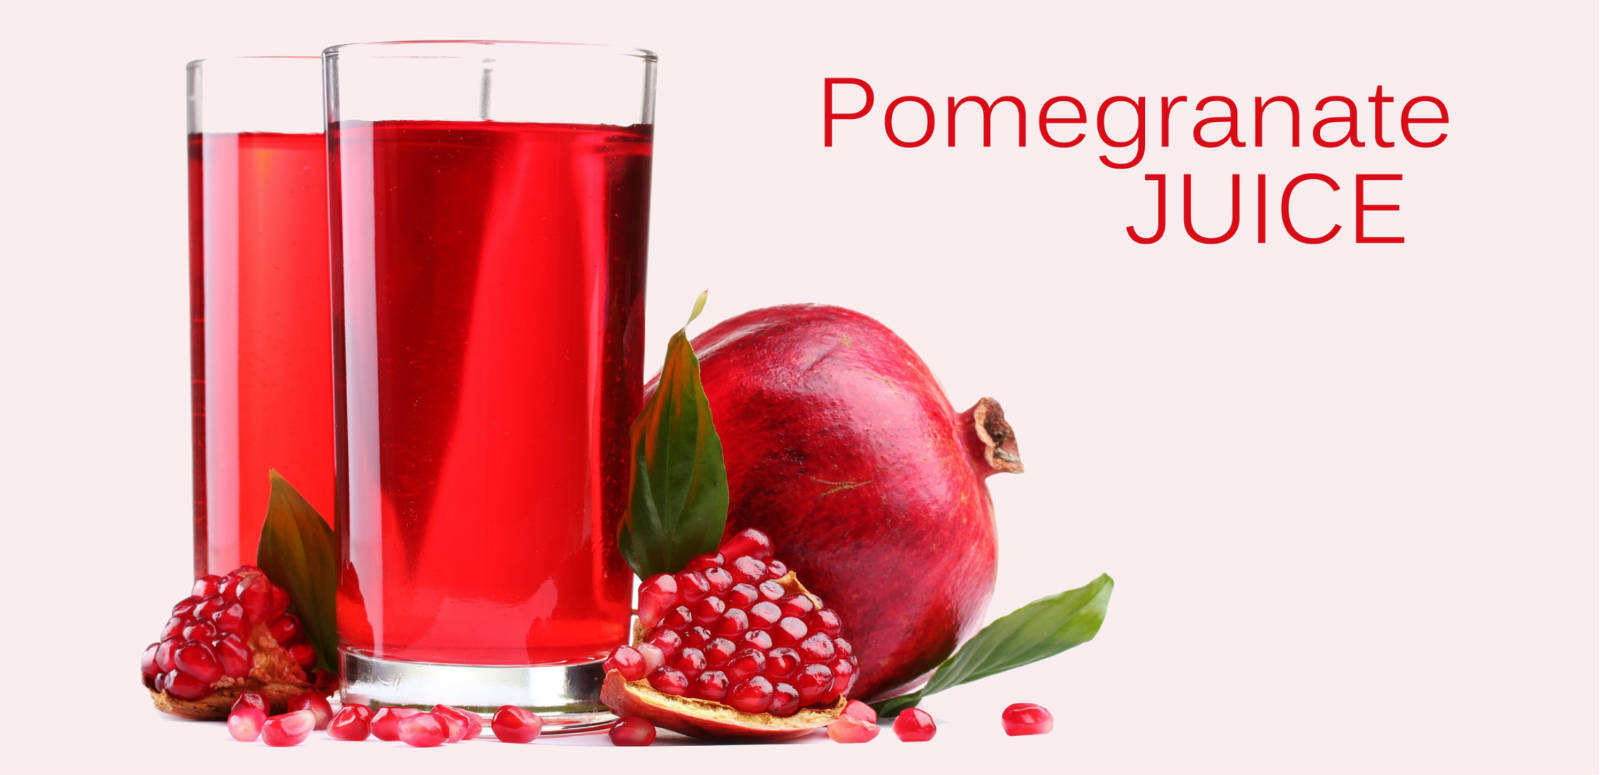 With Fresh Pomegranate Juice Fresh and Healthy You!